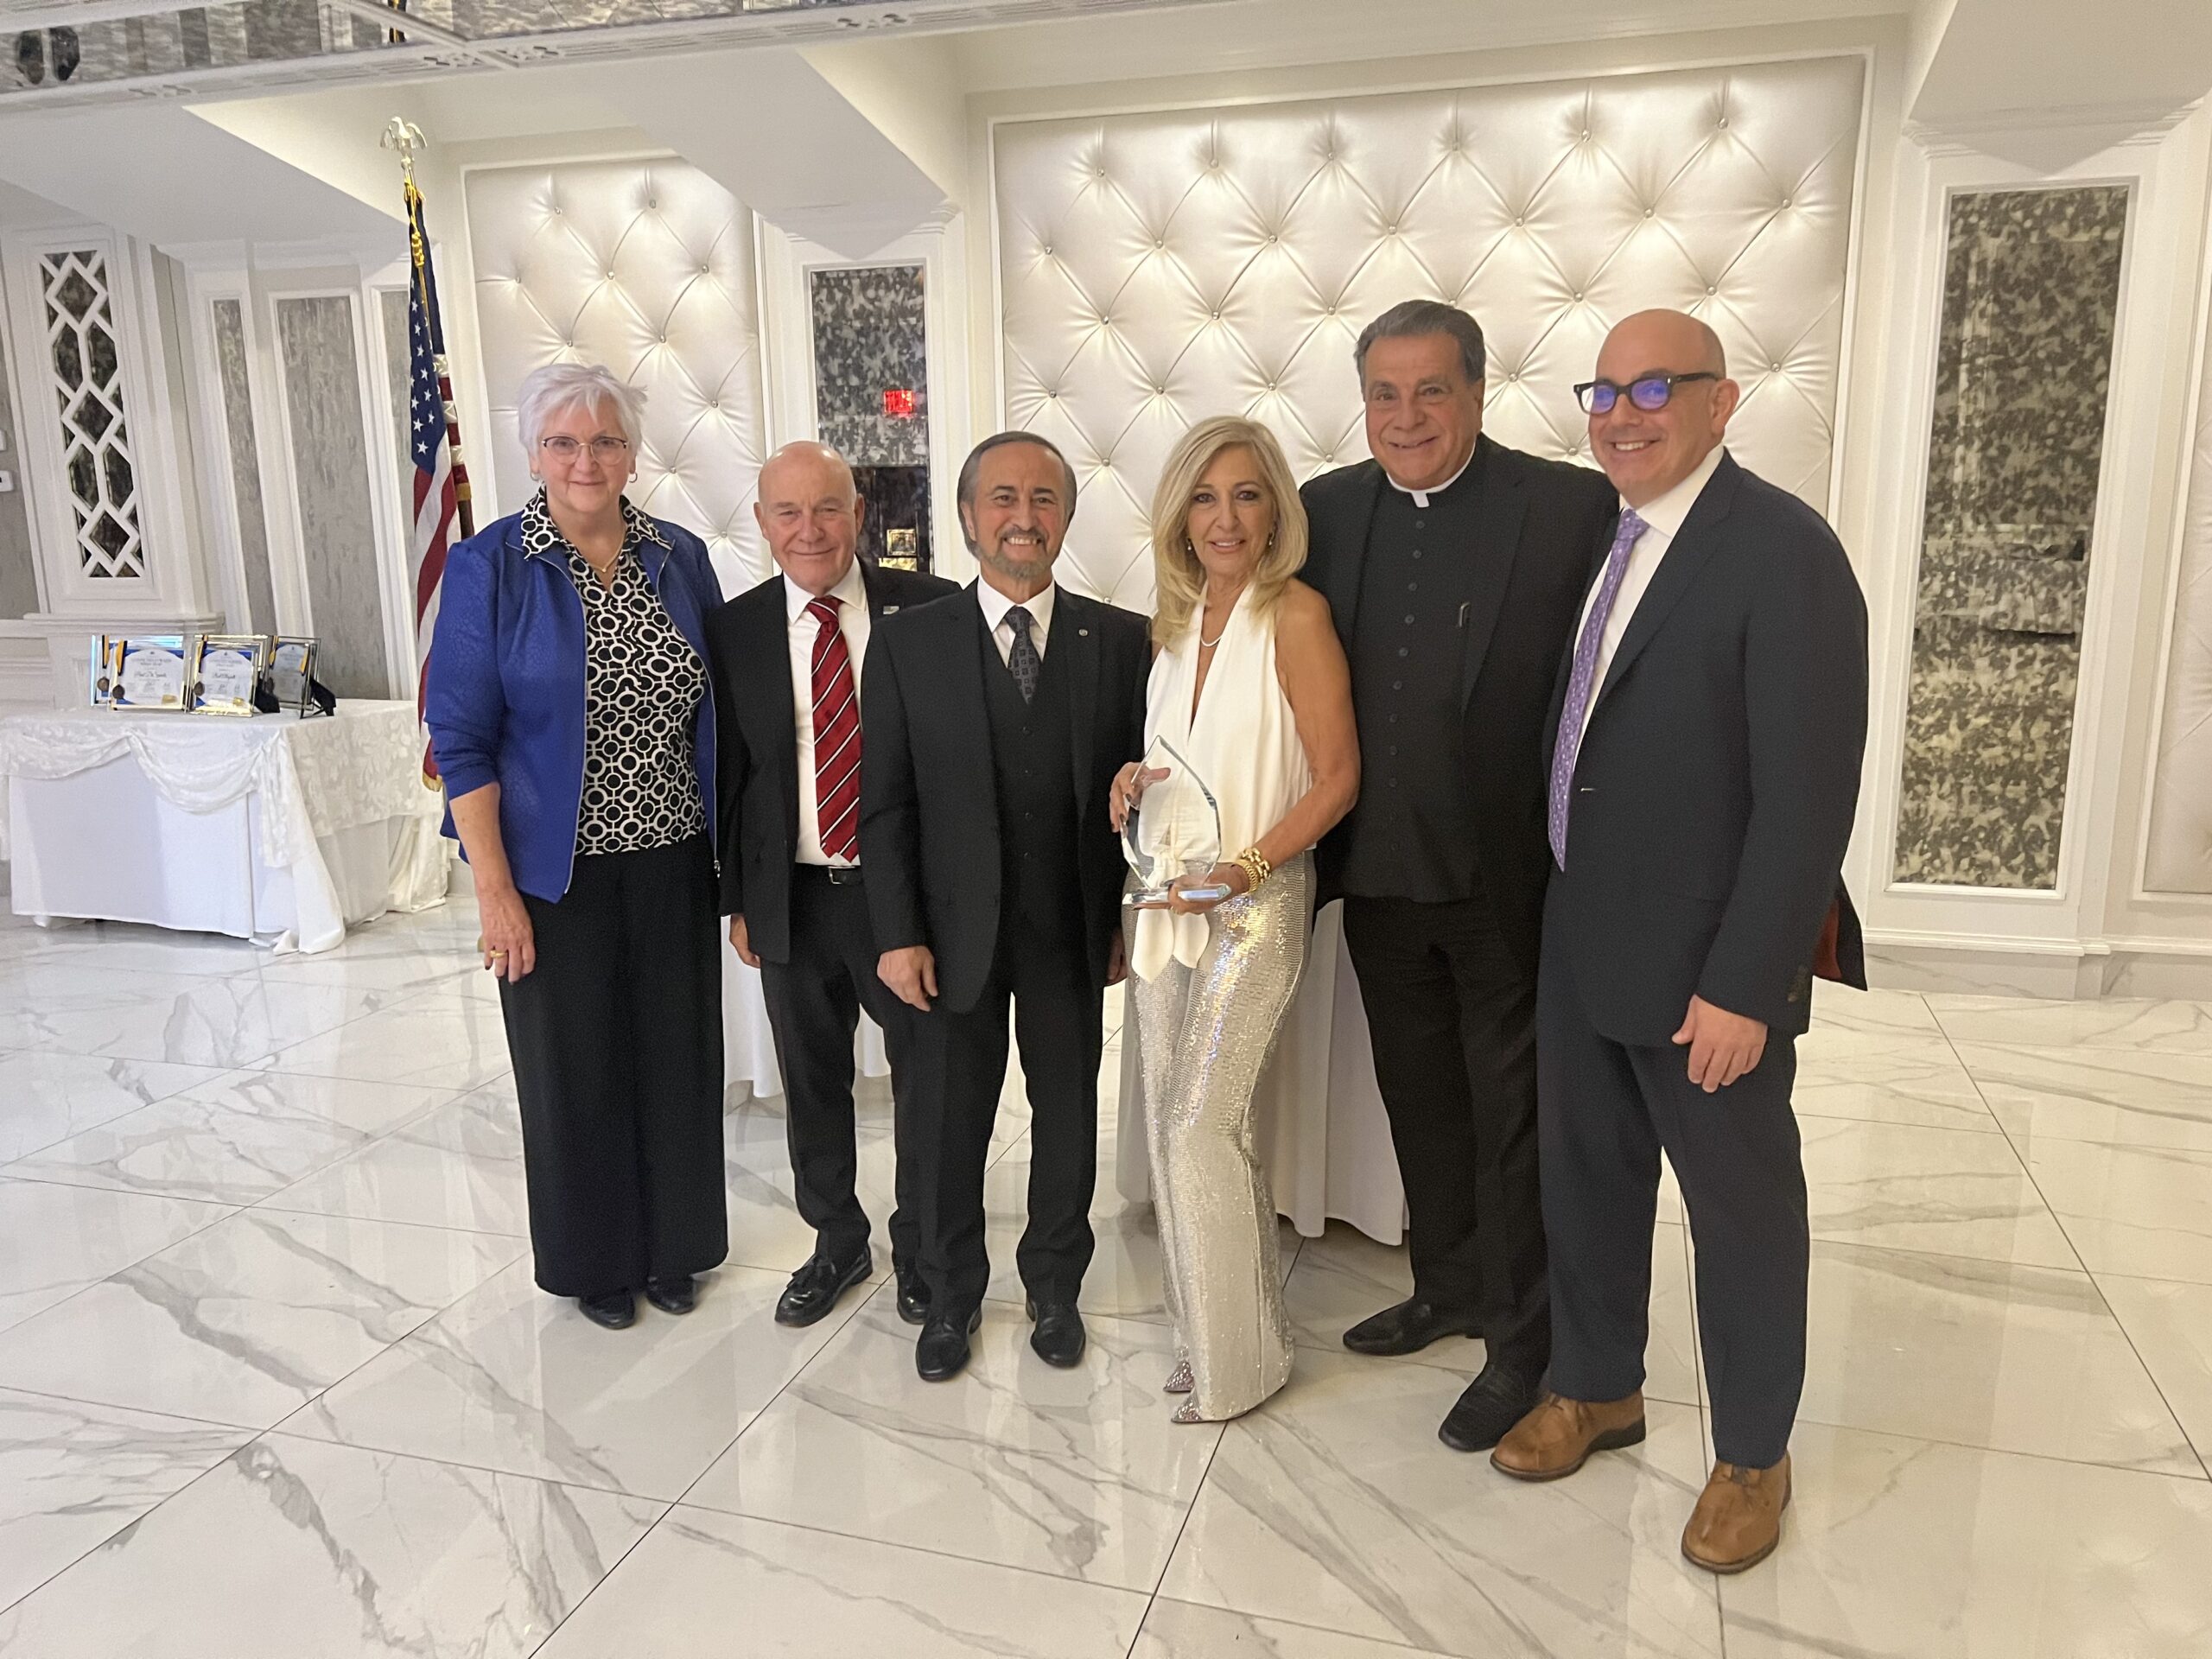 Hon. Patricia DiMango holding her award; and from left: Judy Bachman, executive vice president and COO, Maimonides; Brian Long; Frank Naccarato, co-chair of Community for Kids and board member/trustee of Maimonides Medical Center; Msgr. David Cassato, Maimonides trustee and vicar for education, Diocese of Brooklyn; and Dr. John Marshall, chair of the Department of Emergency Medicine and vice president for medical affairs at Maimonides at eighth annual Community for Kids Benefit.